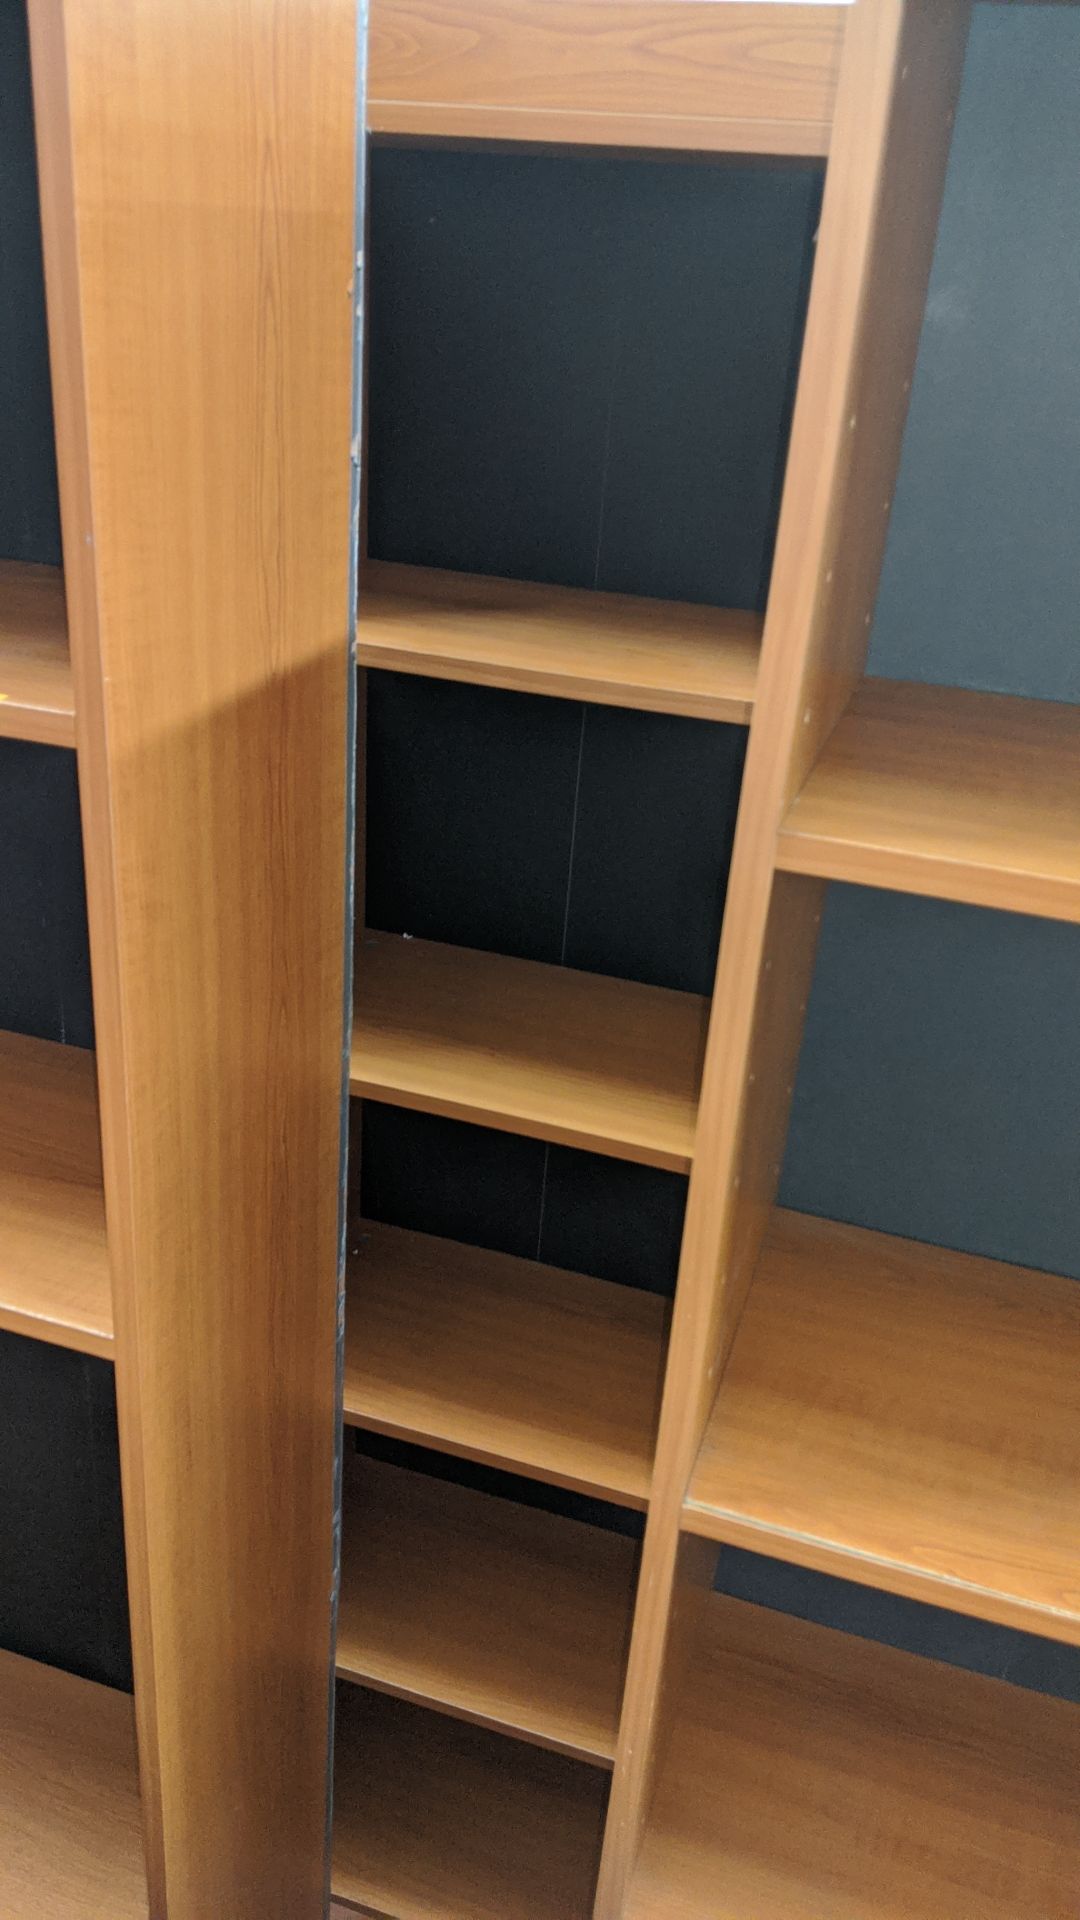 2 off open front wooden bookcases to match the bulk of the other office furniture in this sale. This - Image 4 of 4